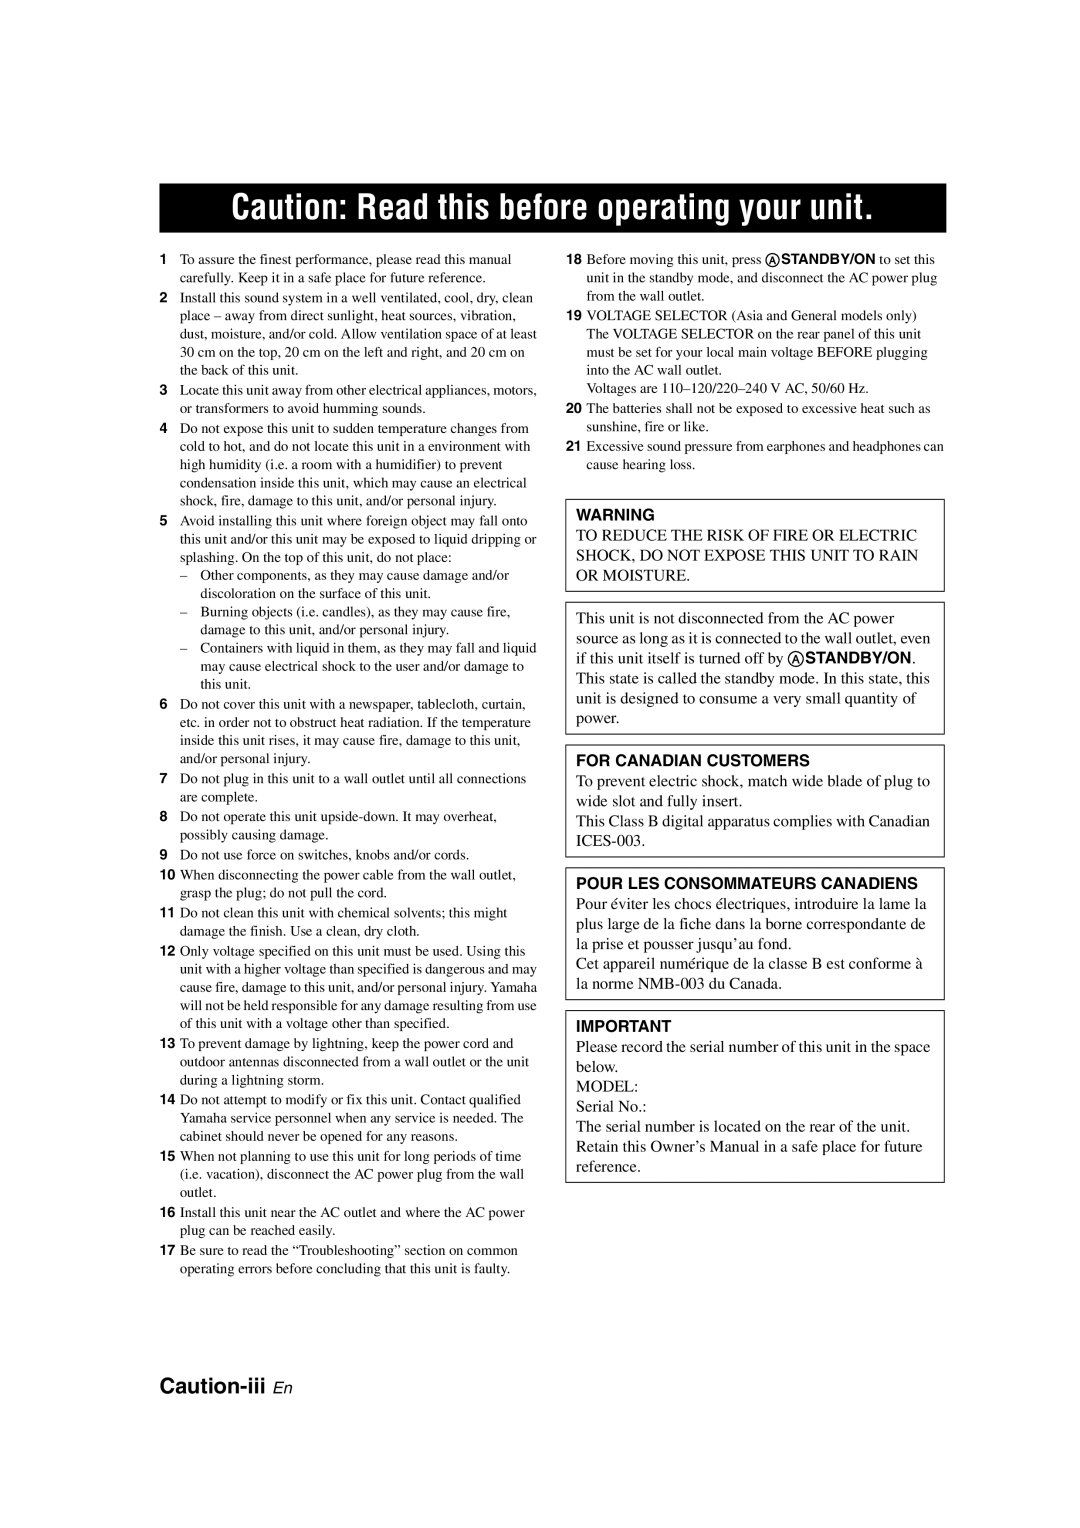 Yamaha HTR-6130 owner manual Caution Read this before operating your unit, Caution-iii En 